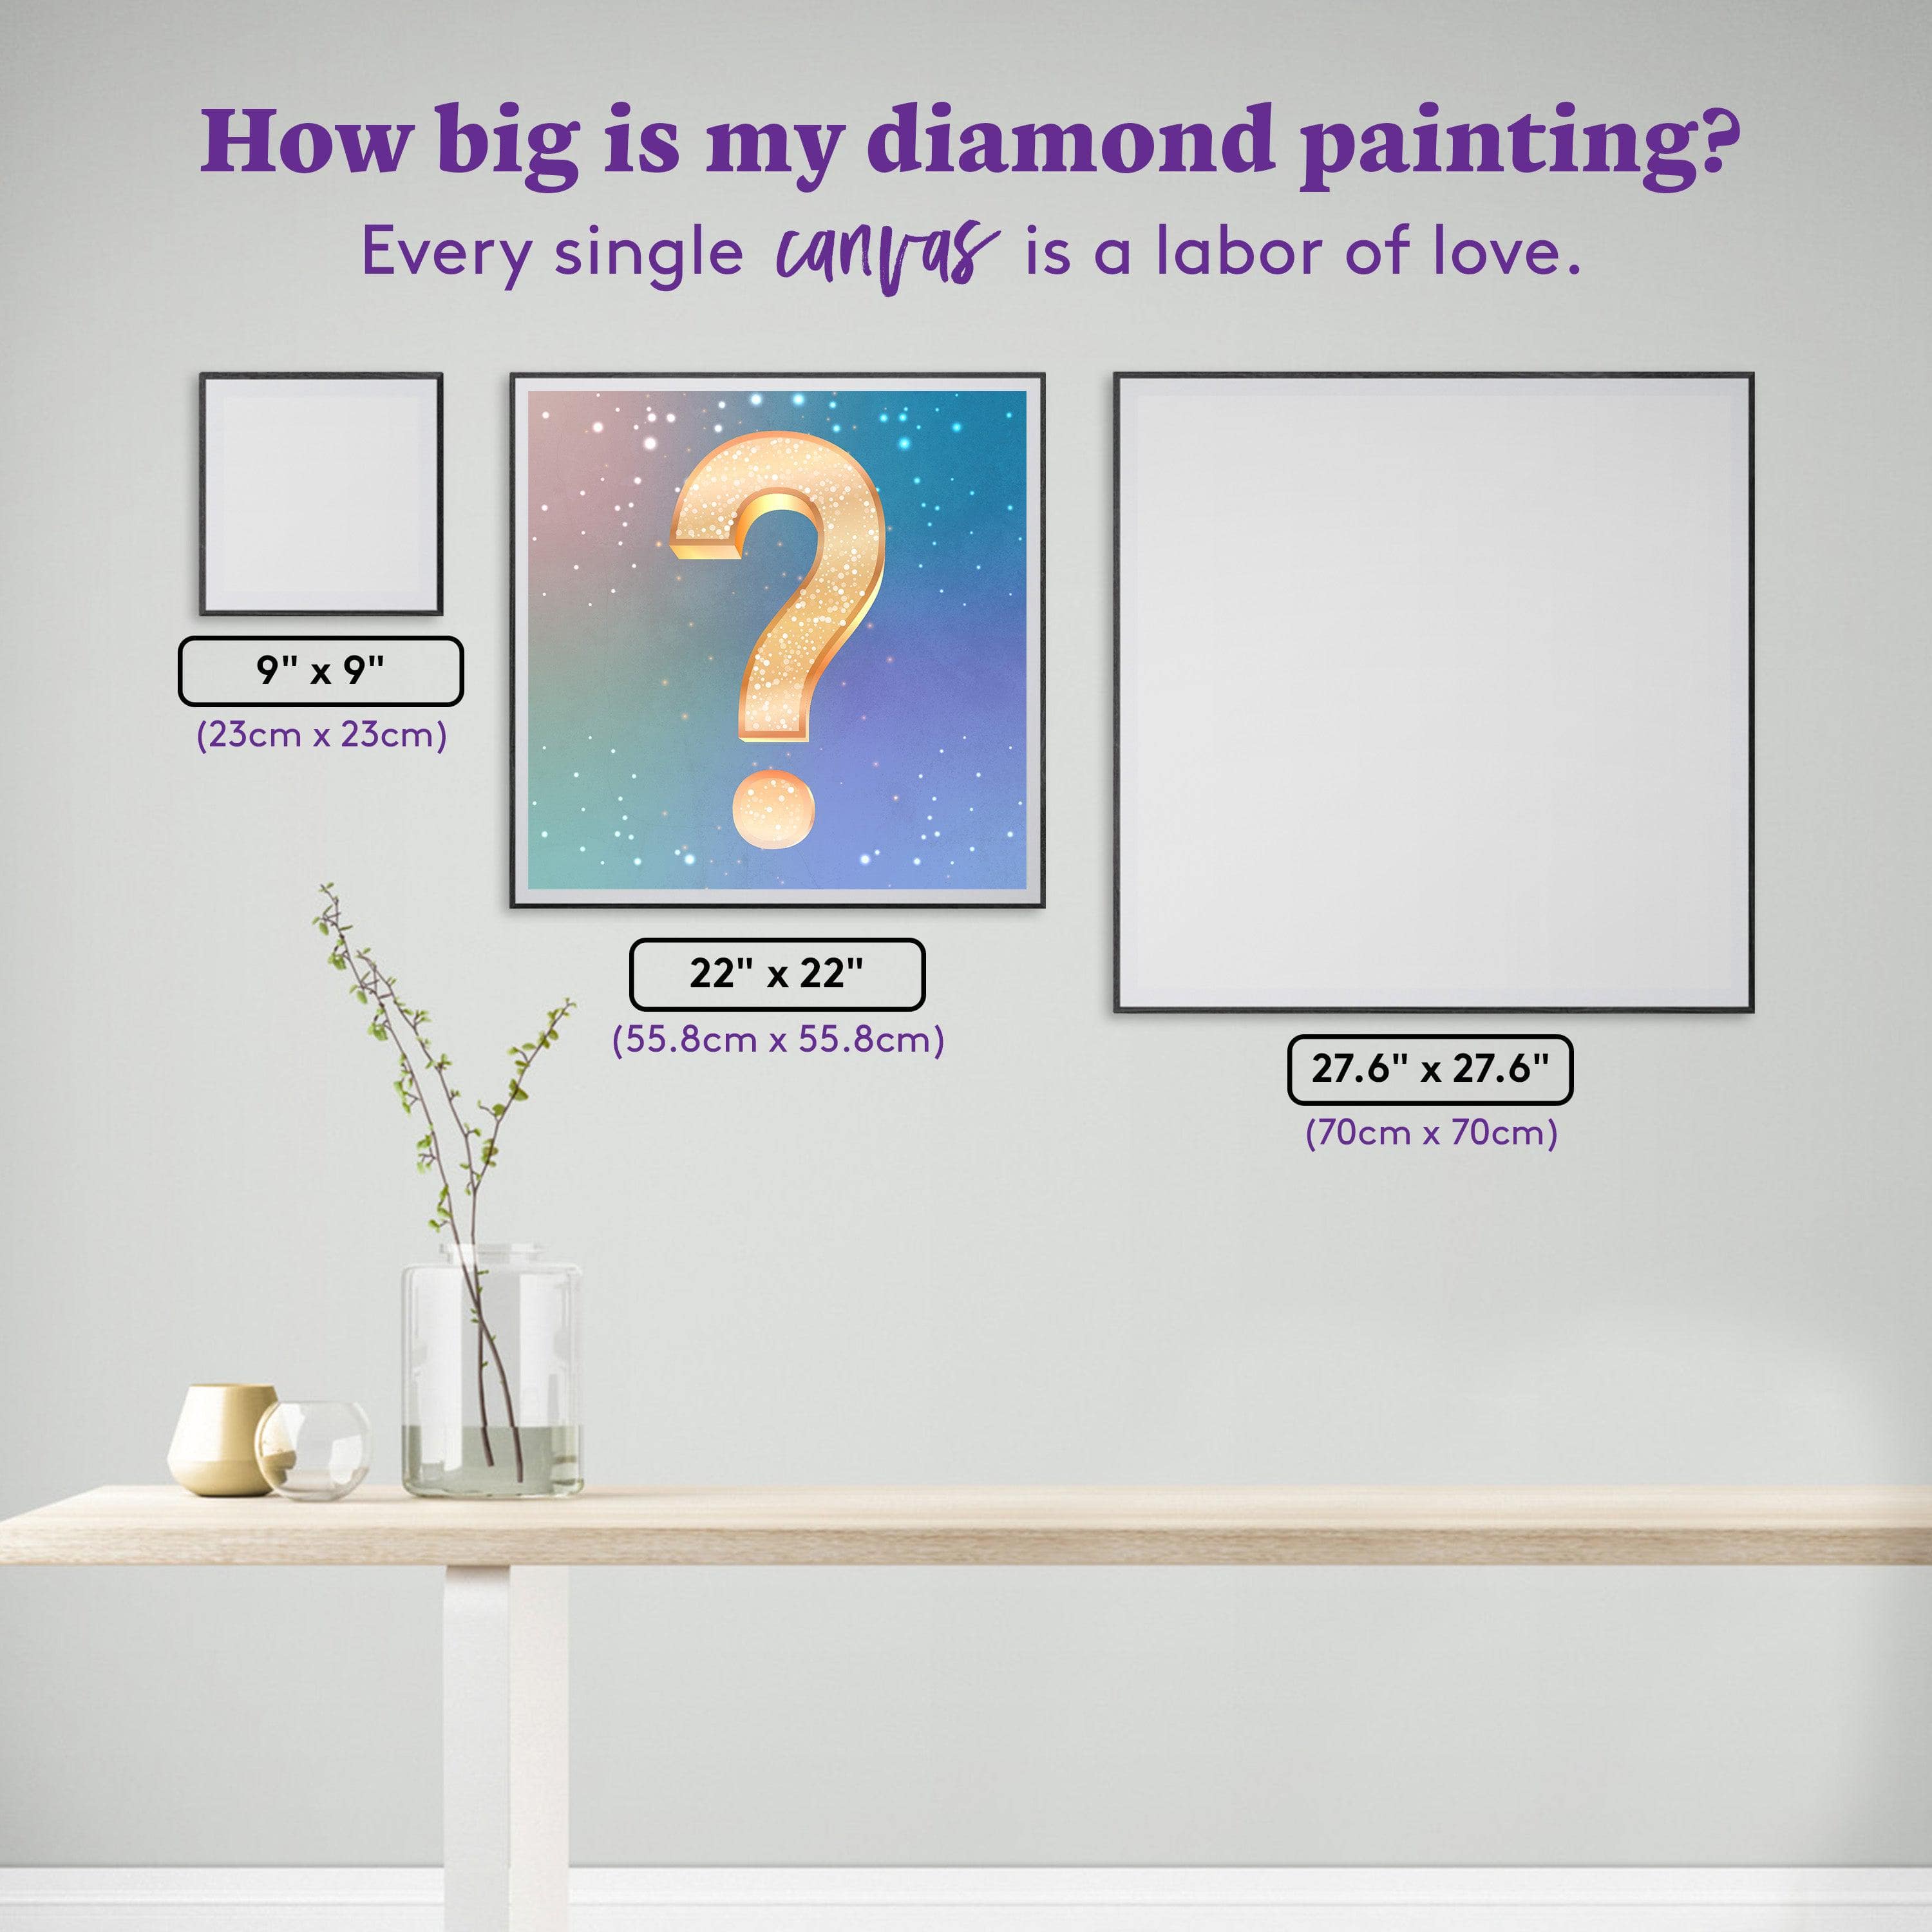 Bought a mystery animal diamond painting and just finished it… found the  image it's using and I'm tempted to buy the real one to compare : r/ diamondpainting